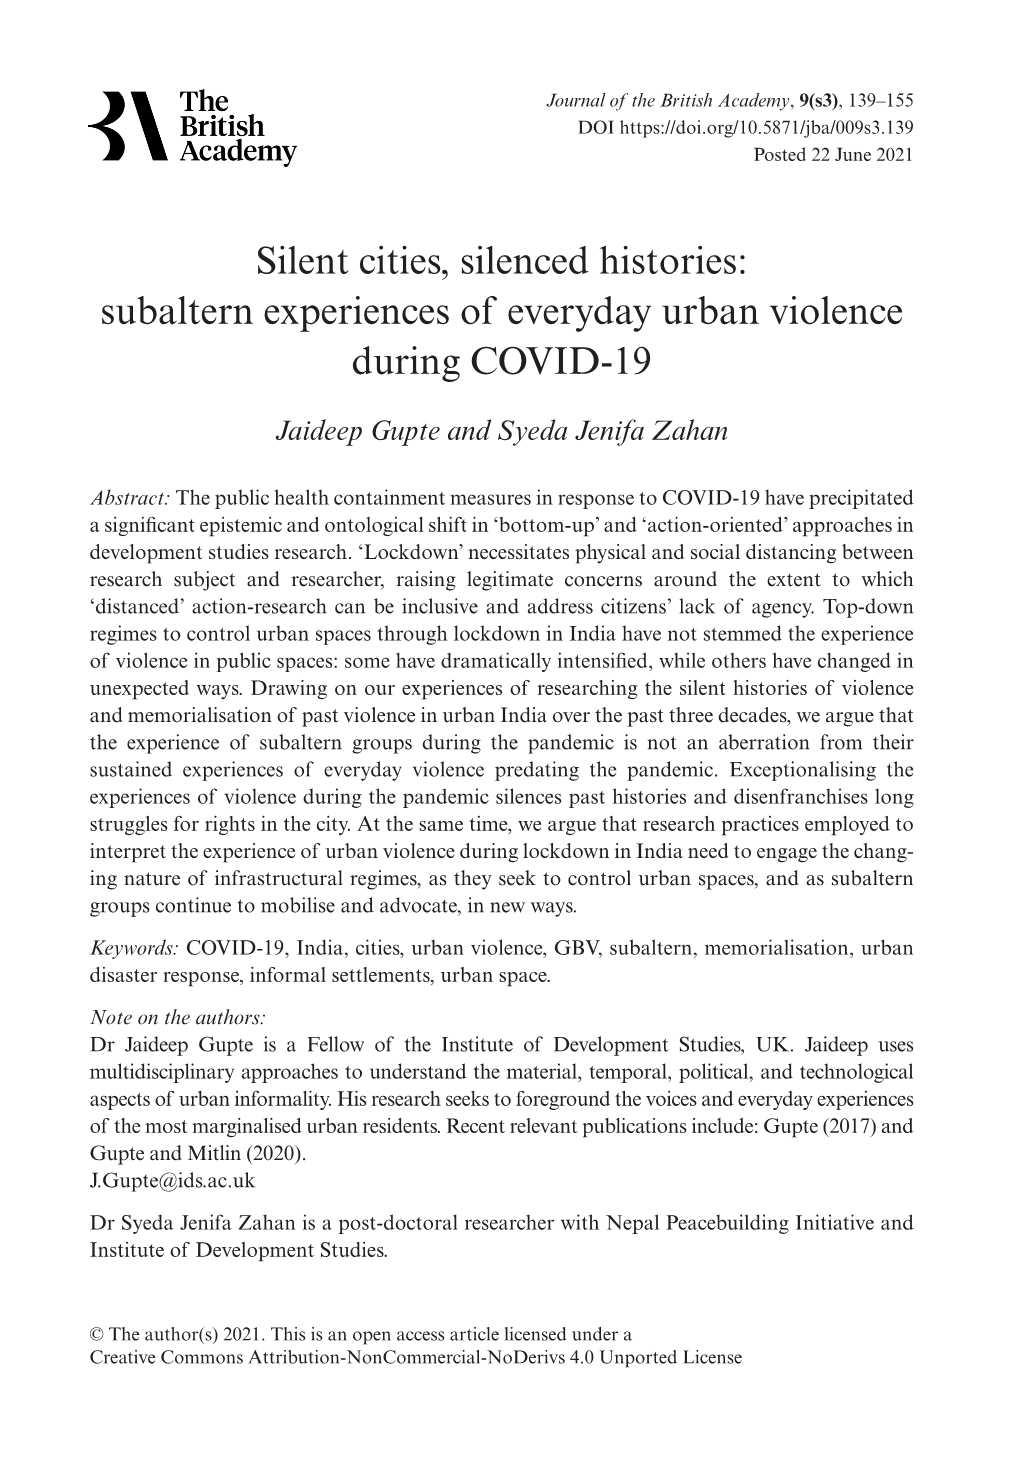 Subaltern Experiences of Everyday Urban Violence During COVID-19